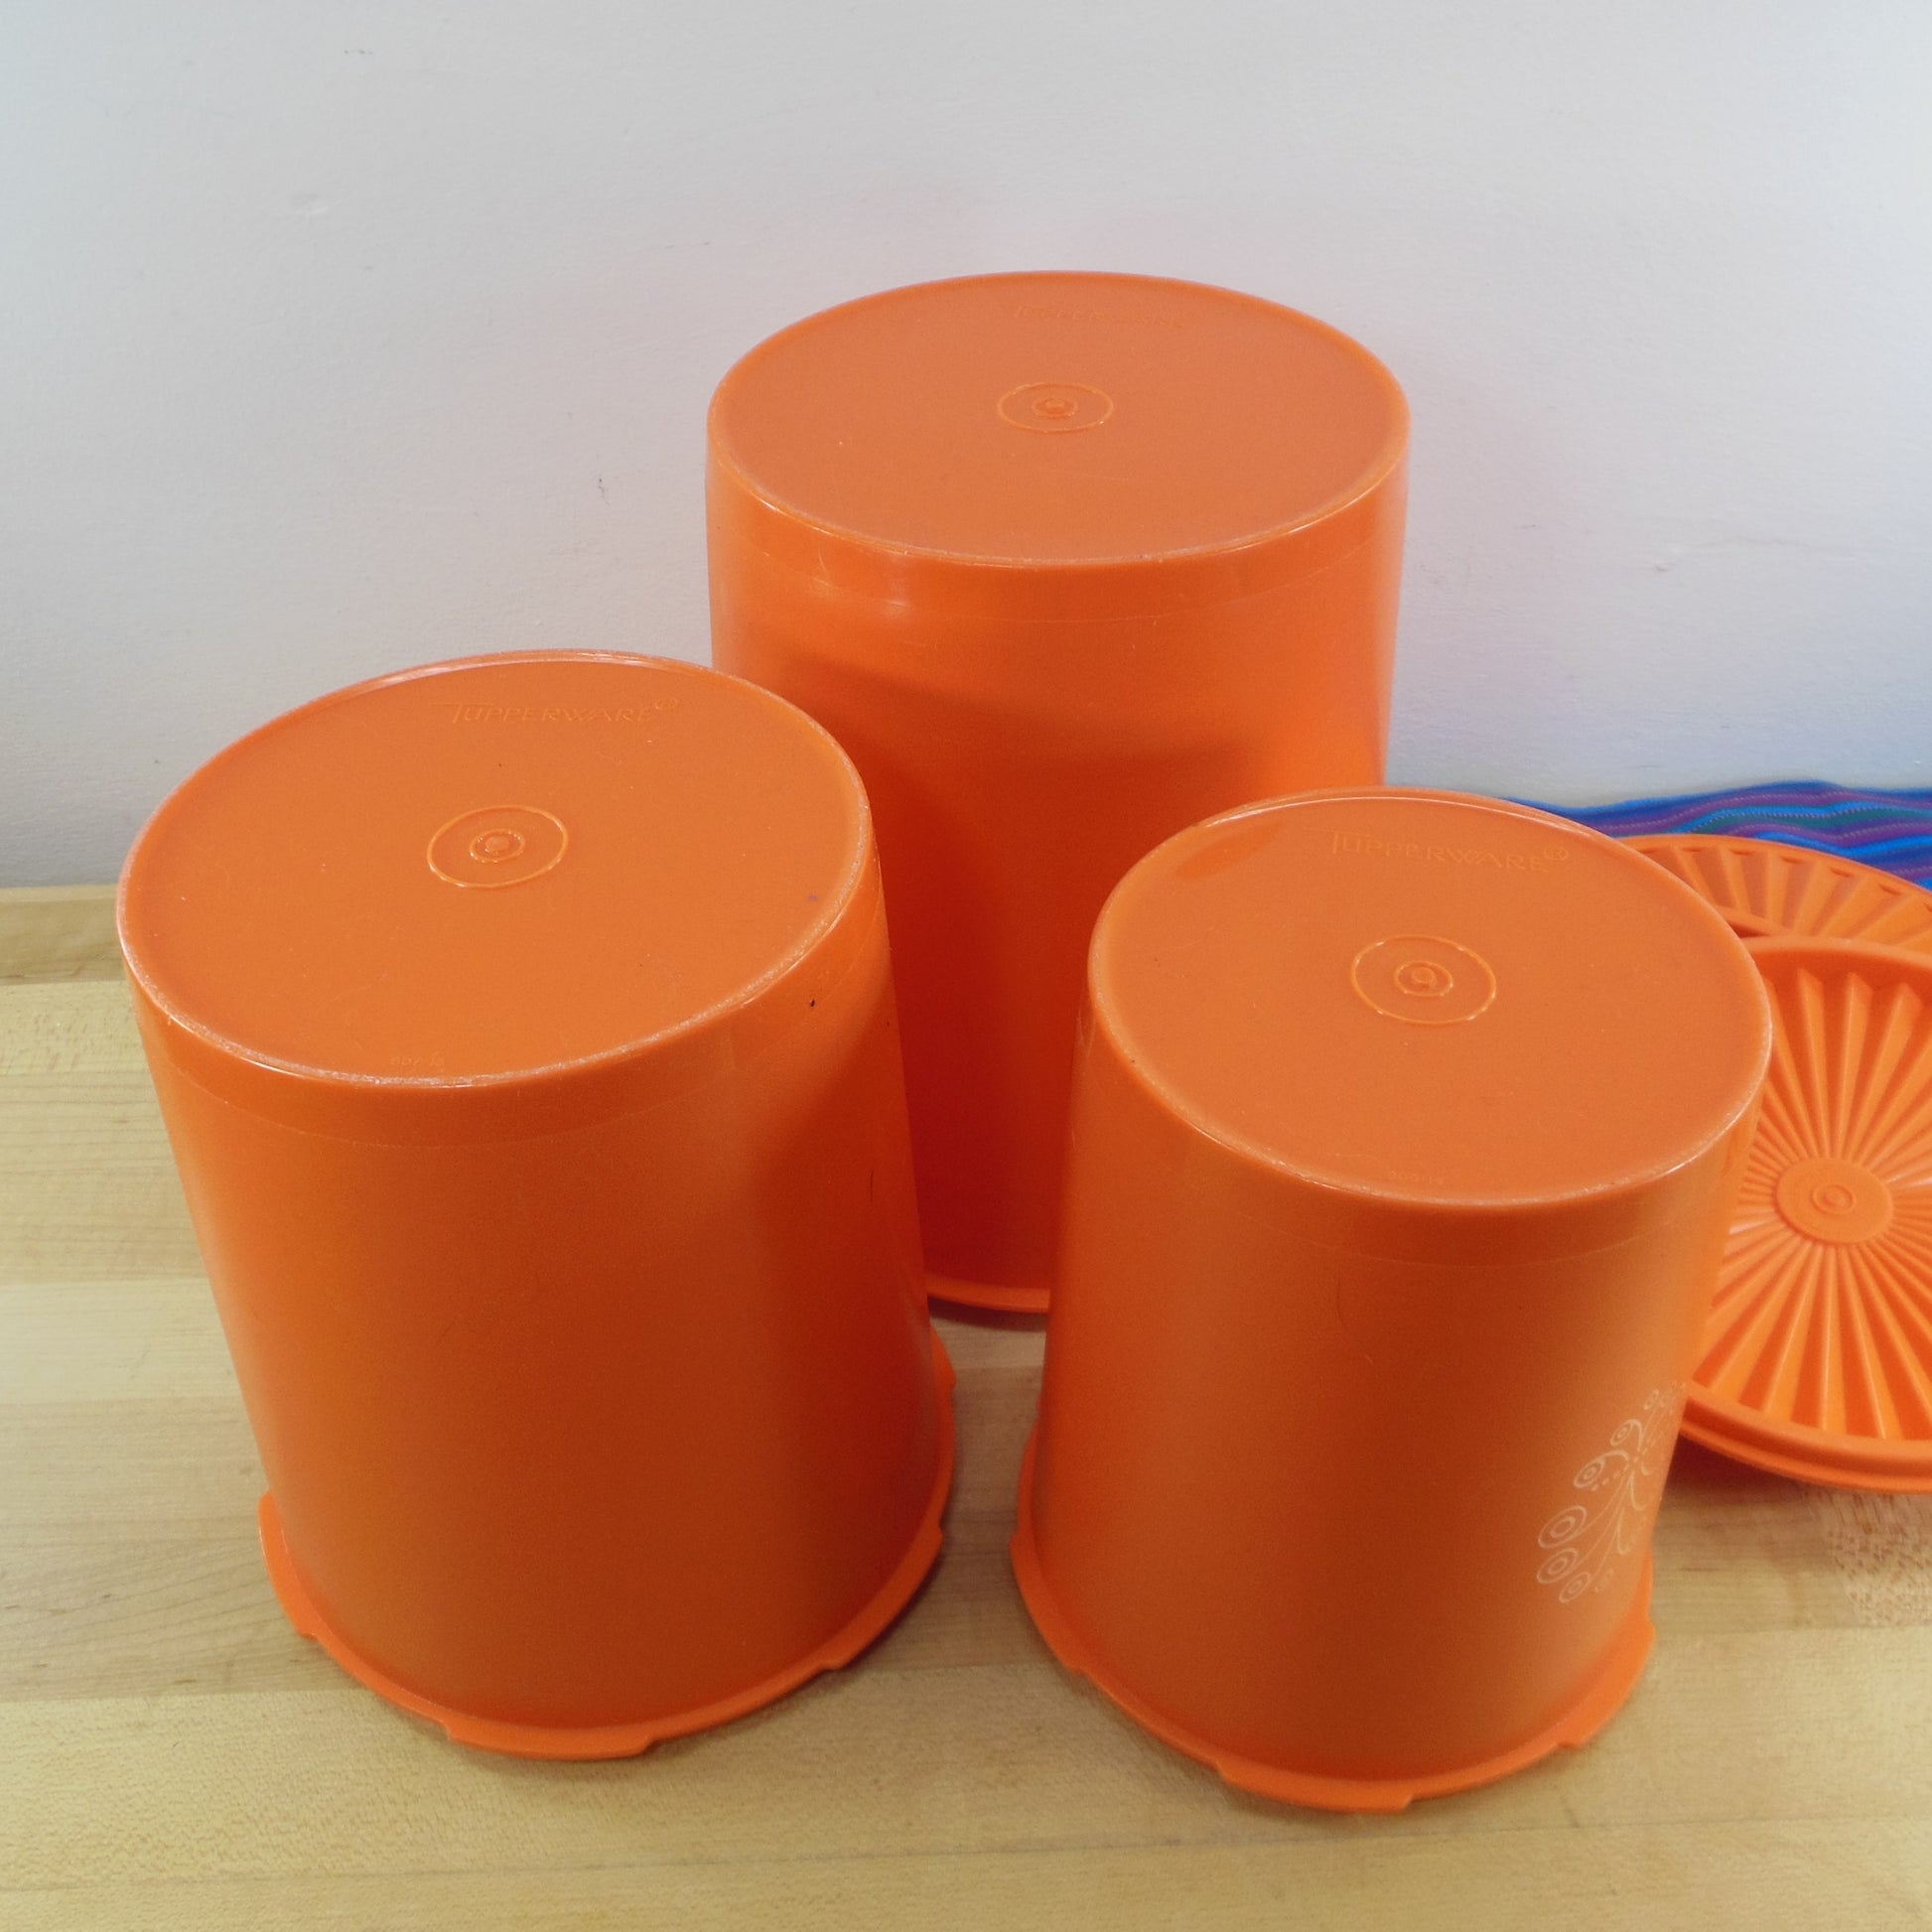 Tupperware Harvest Gold Canister Set - collectibles - by owner